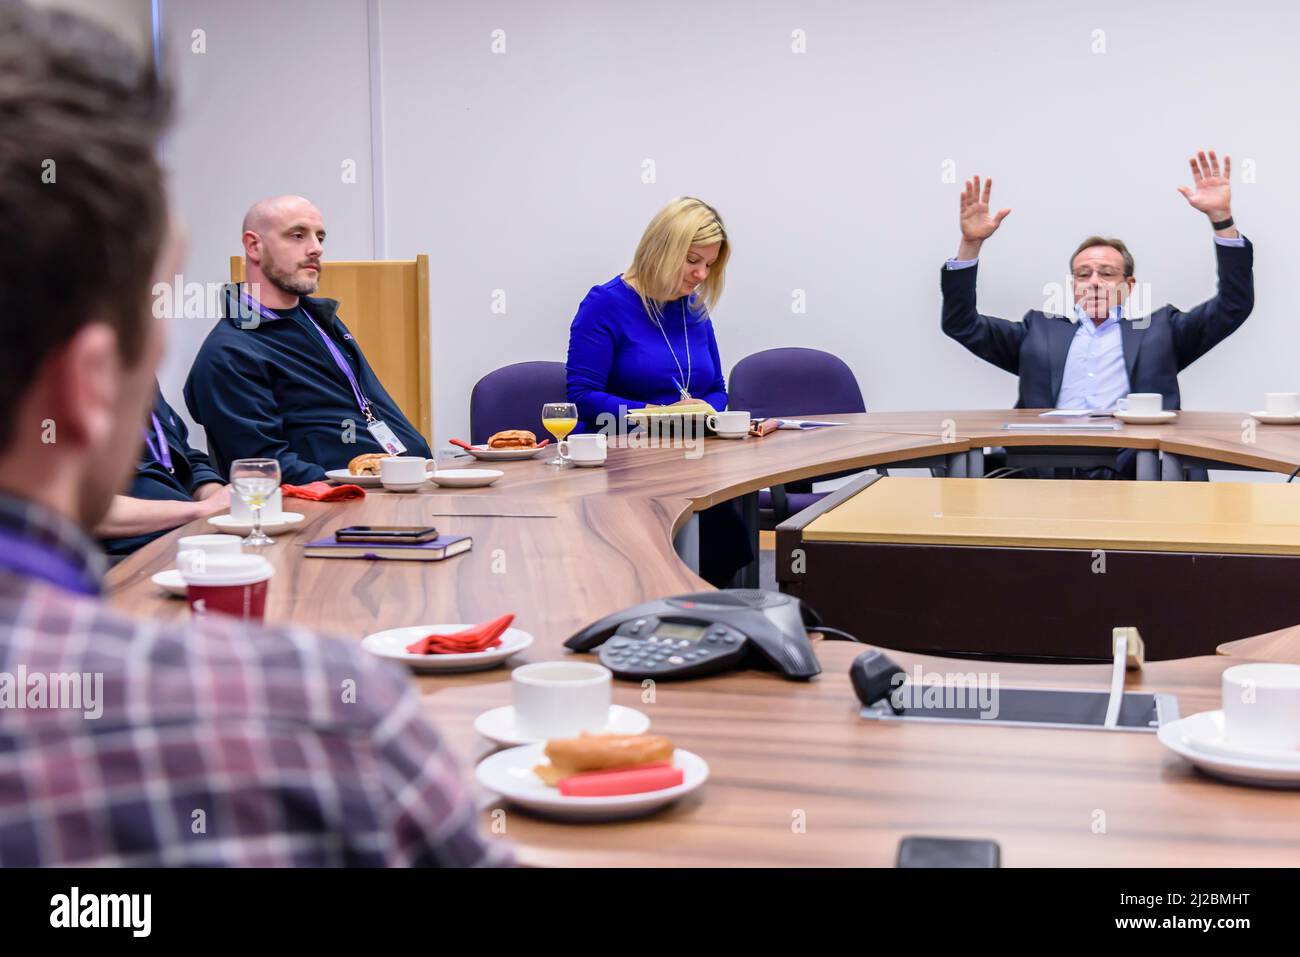 Philip Jansen chairs a meeting during his Belfast Visit, 28/02/2019 Stock Photo